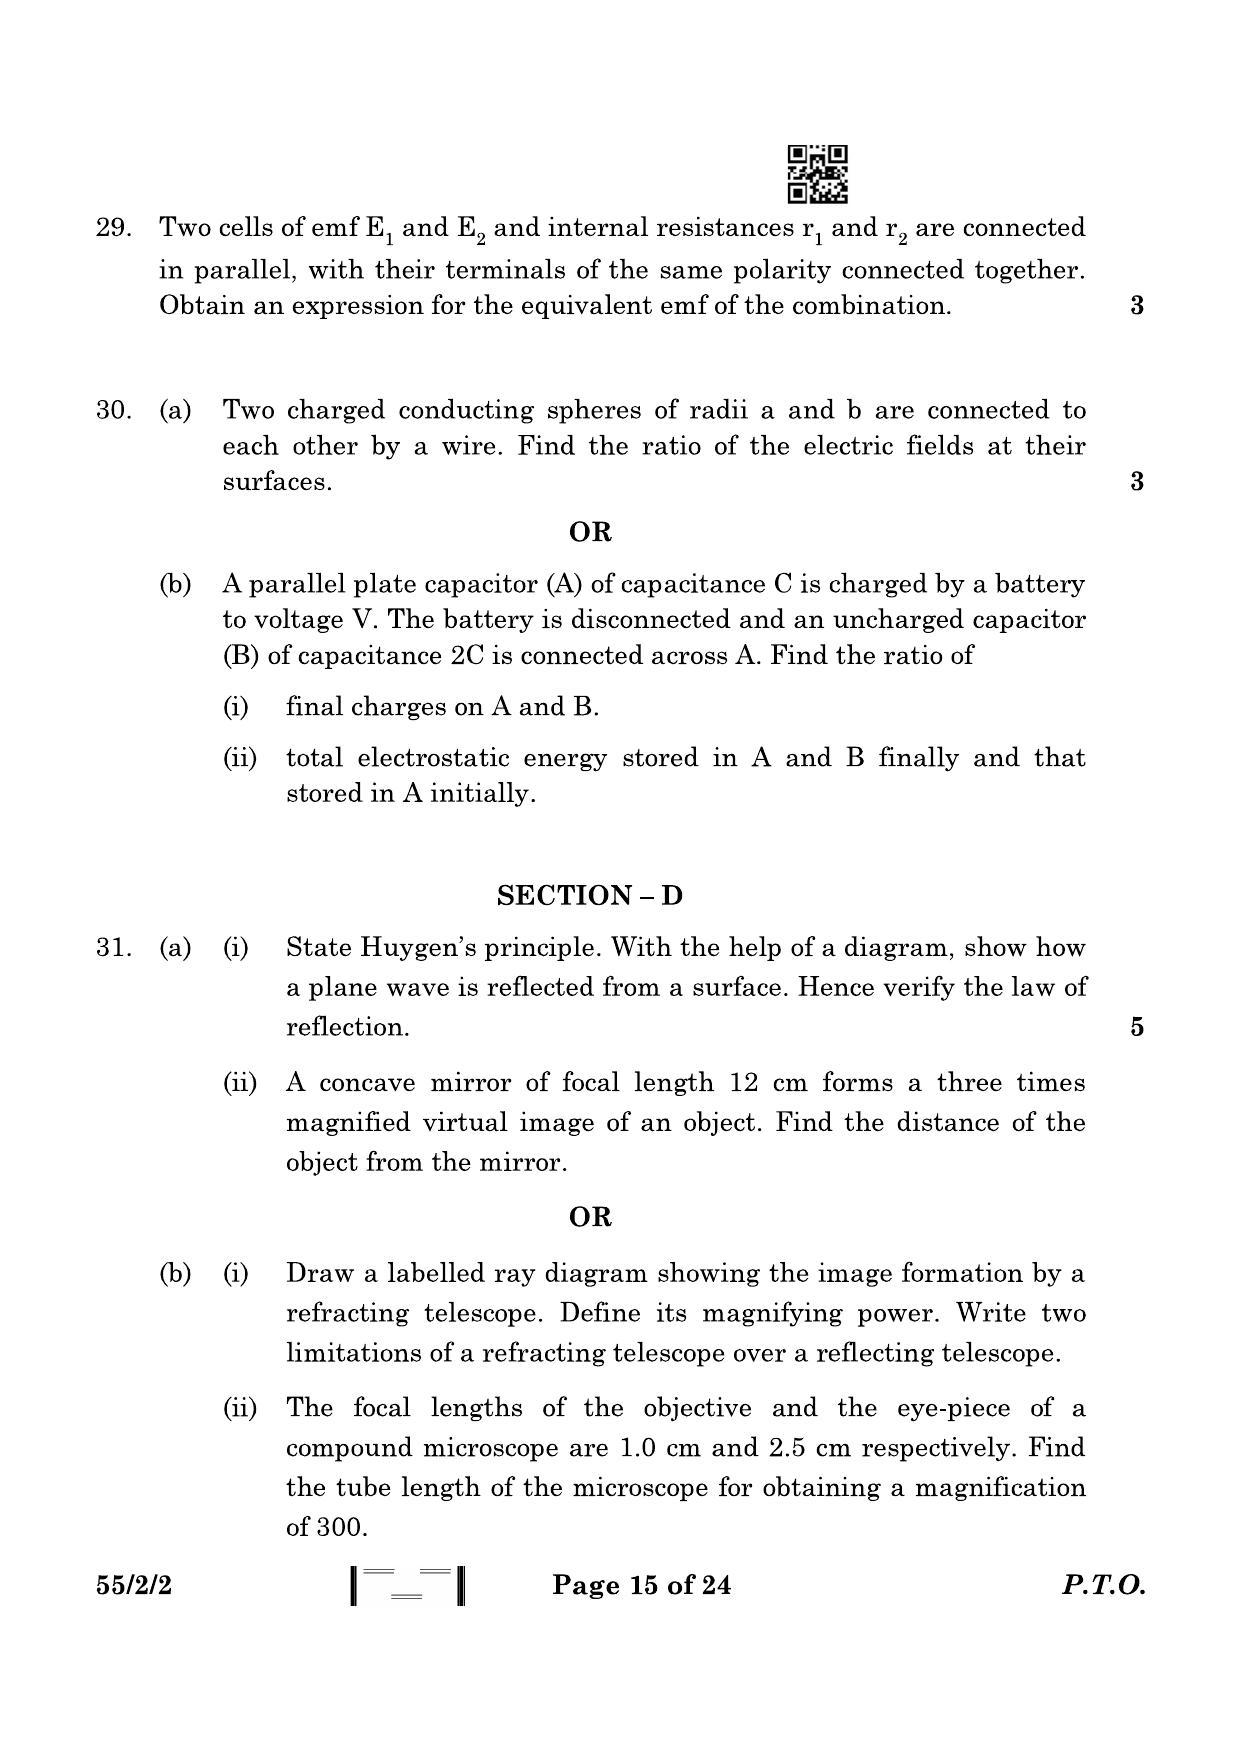 CBSE Class 12 55-2-2 Physics 2023 Question Paper - Page 15